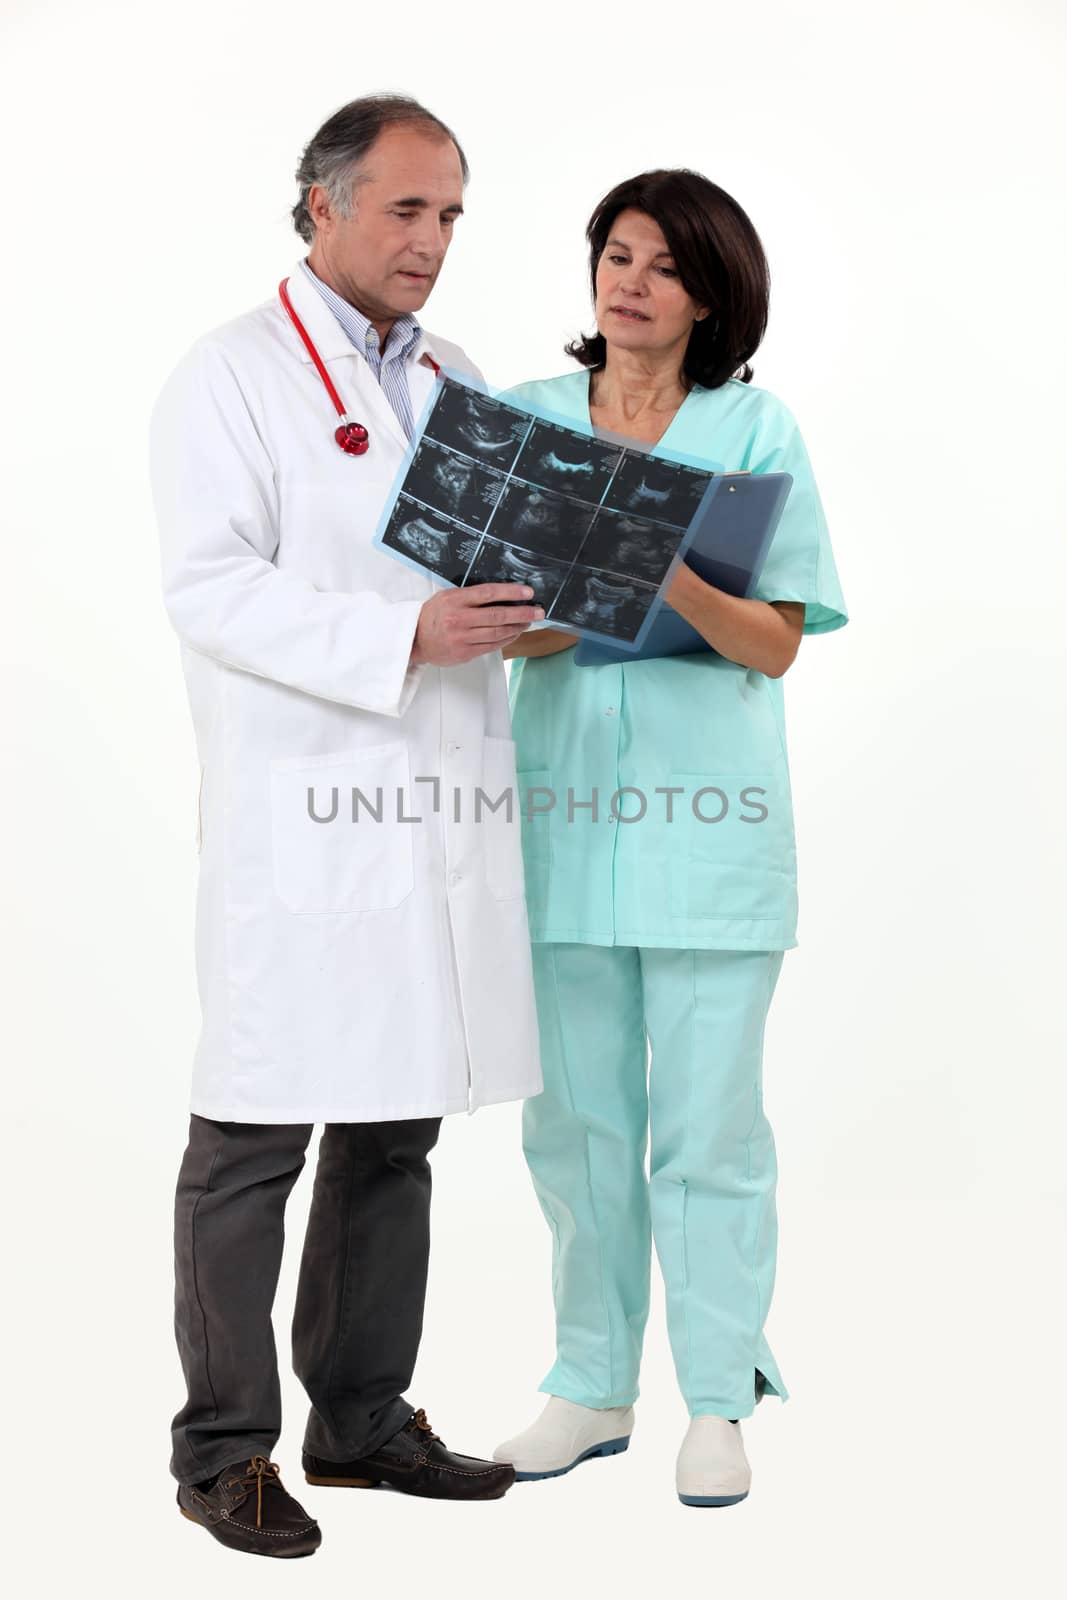 Doctor and nurse looking at x-ray